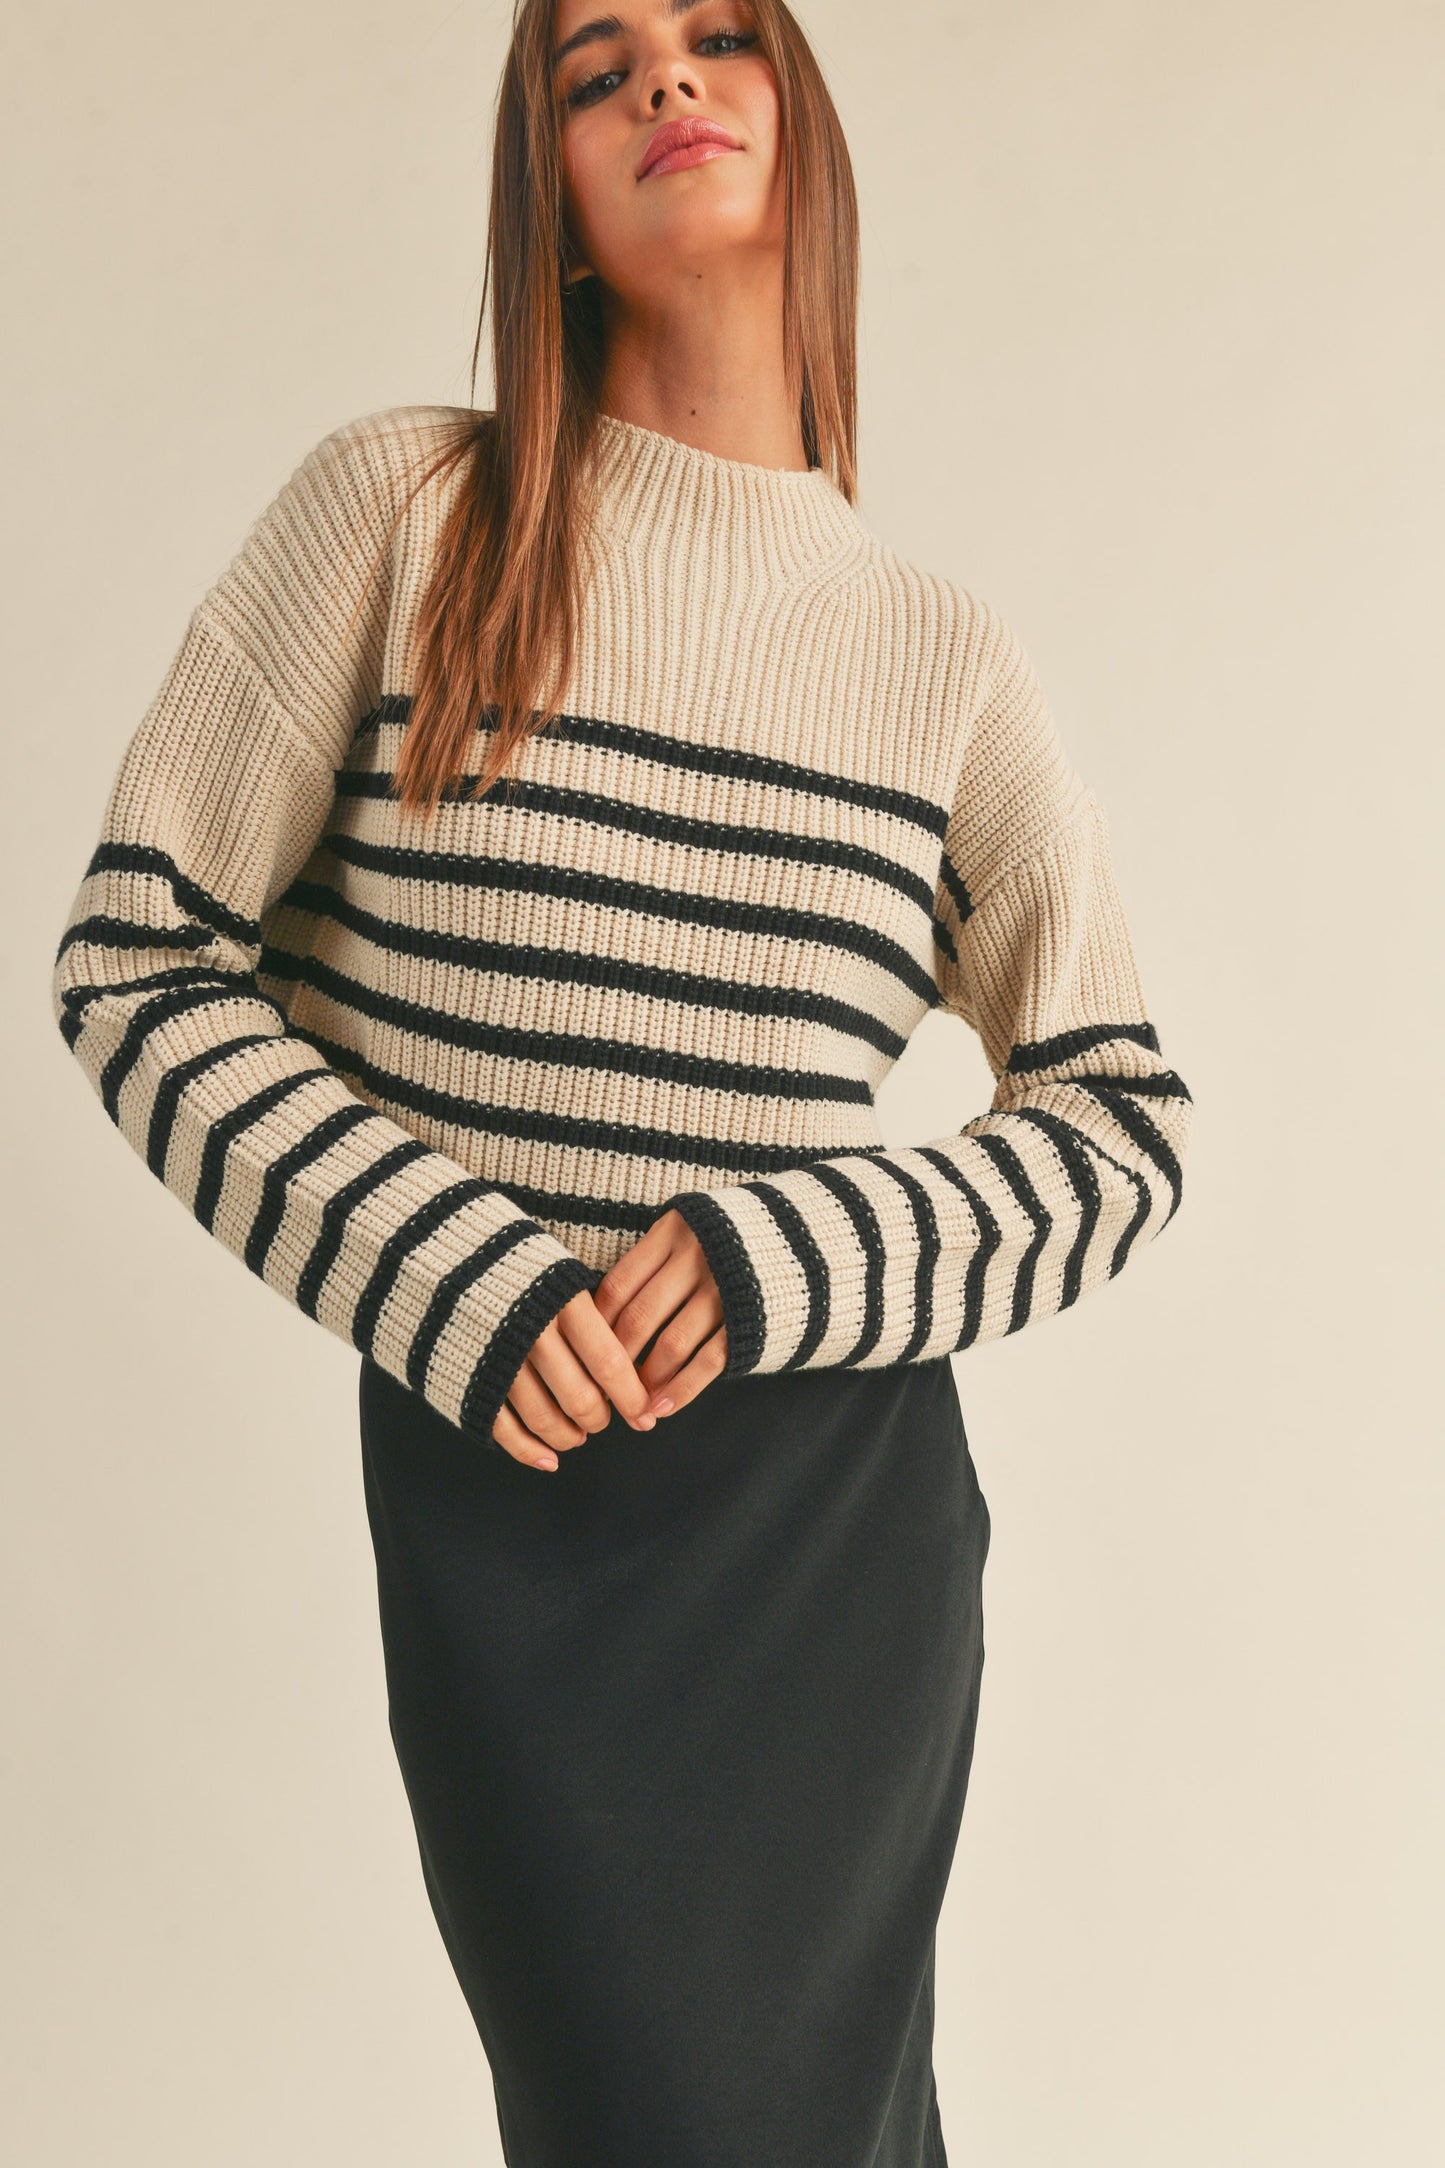 Over My Head Striped Sweater